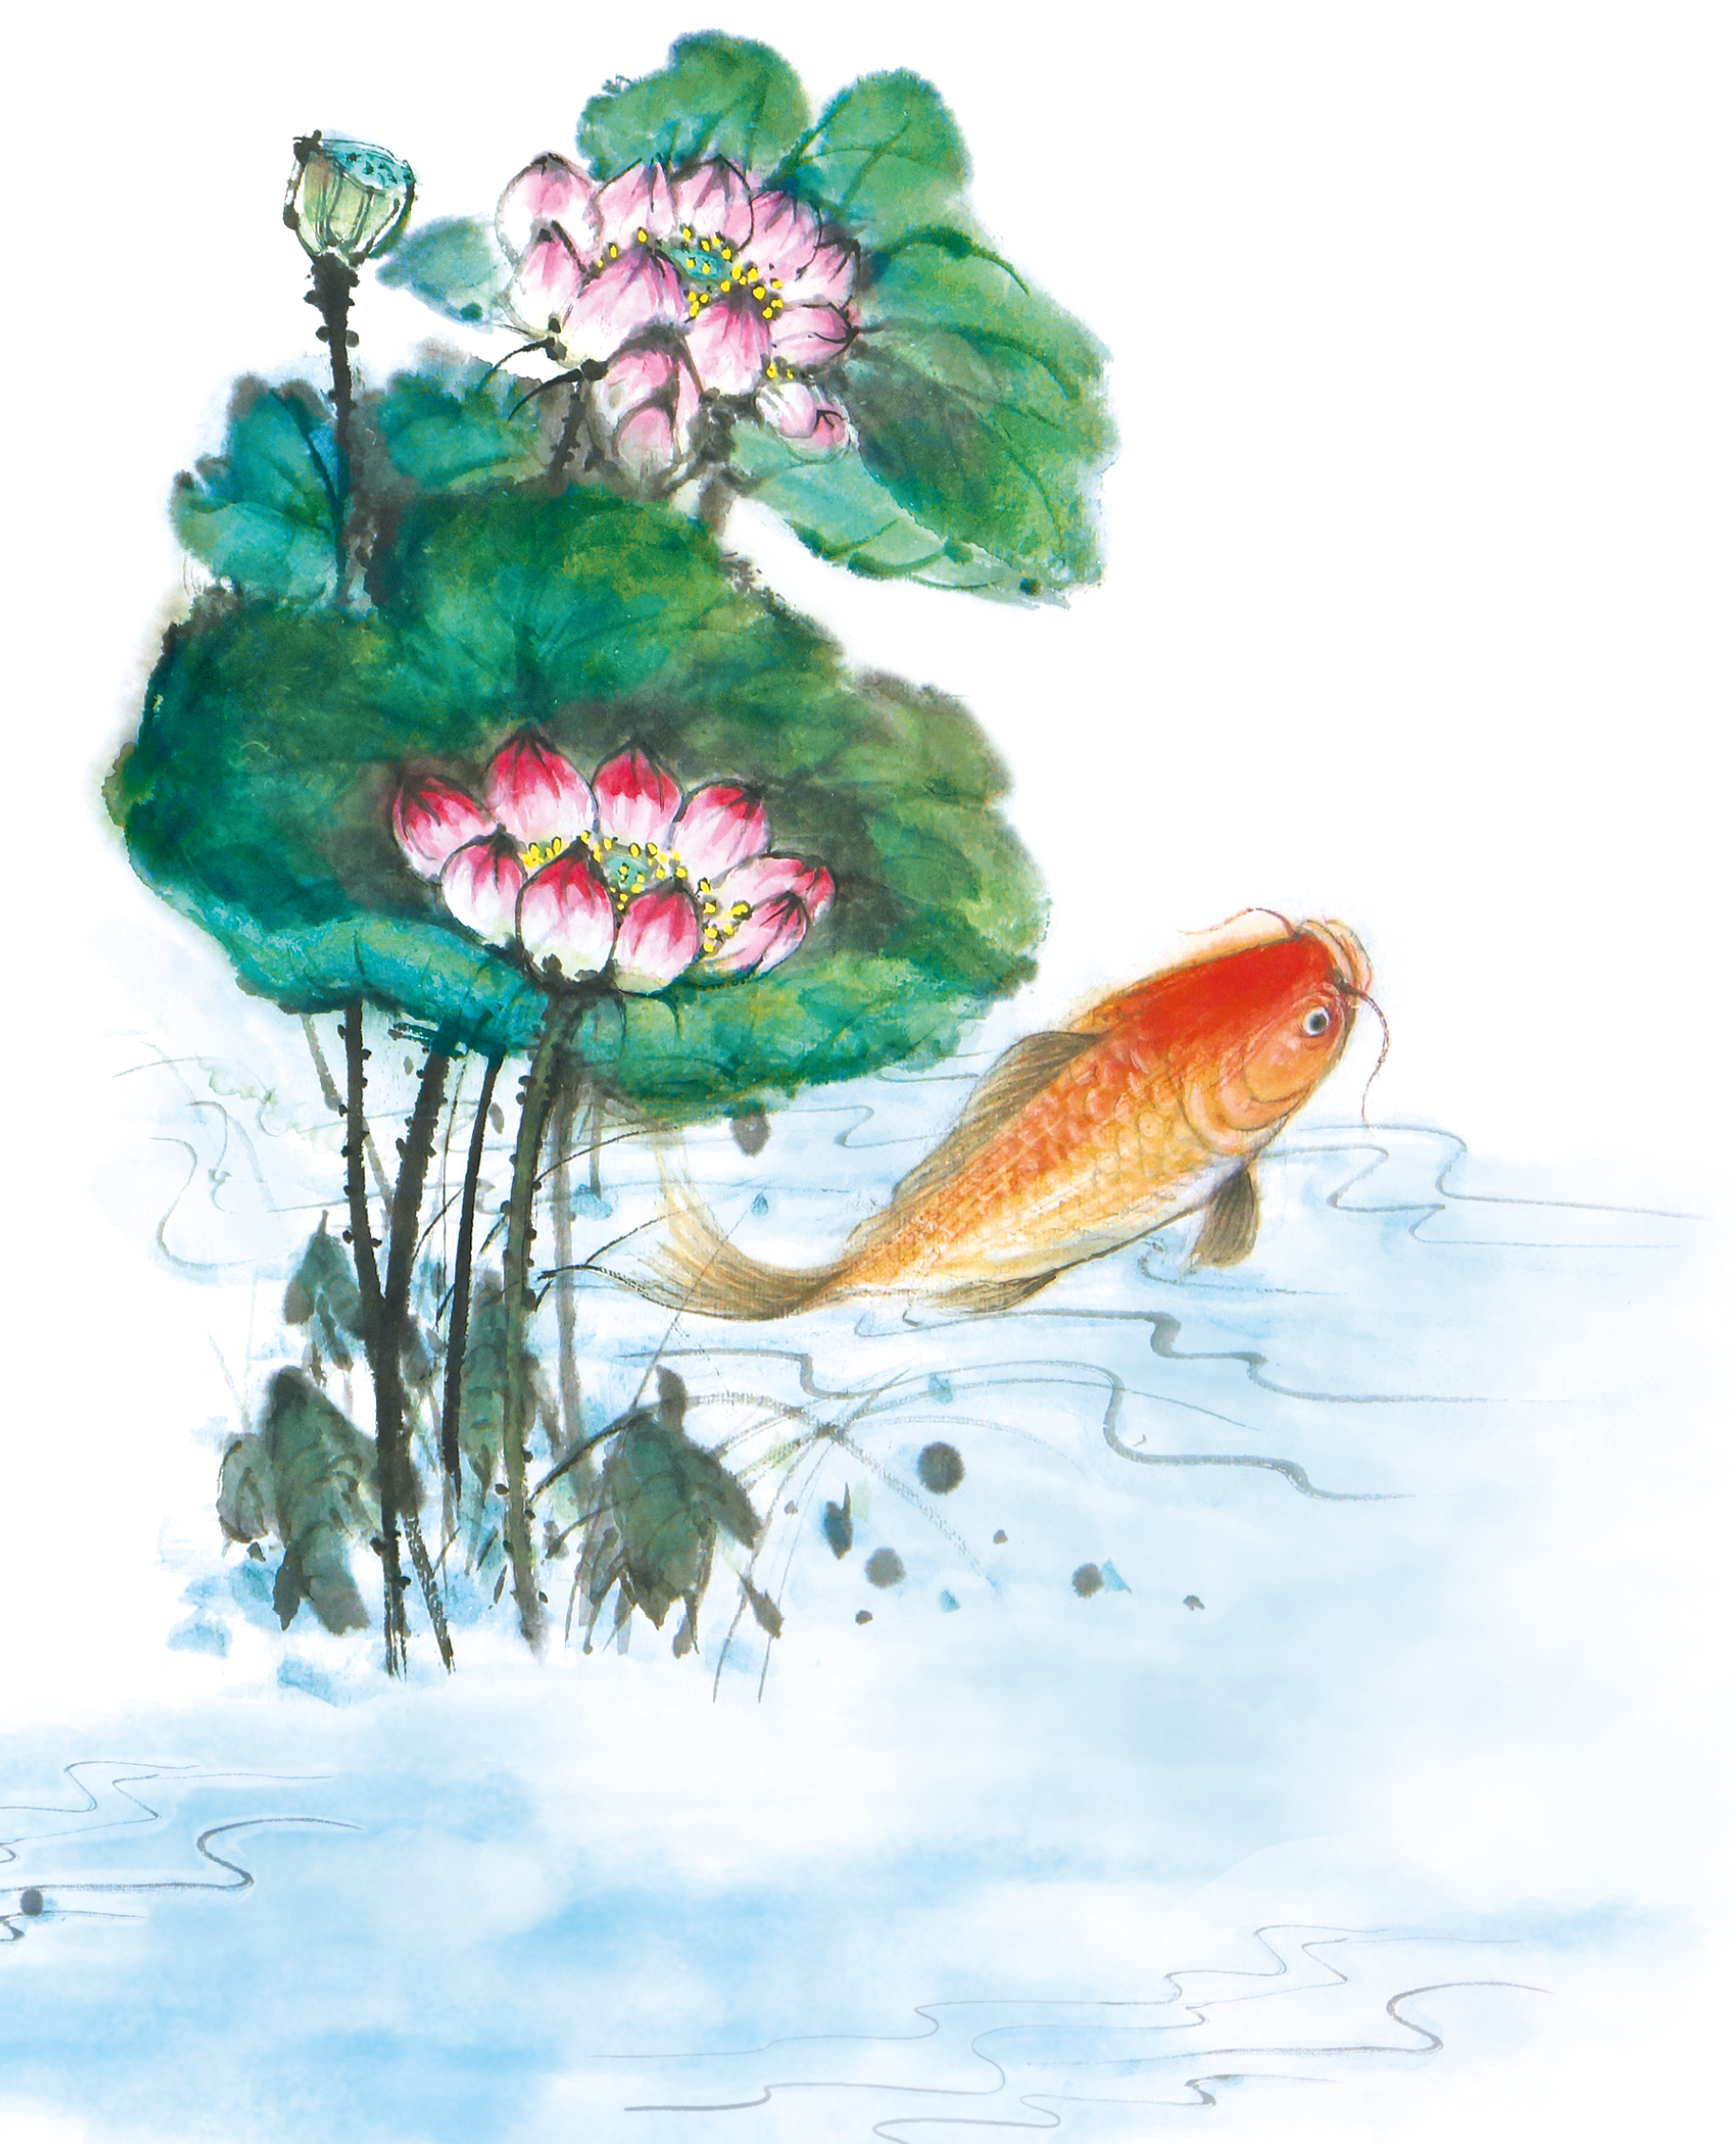 Fish illustration from Illustrated Stories From China